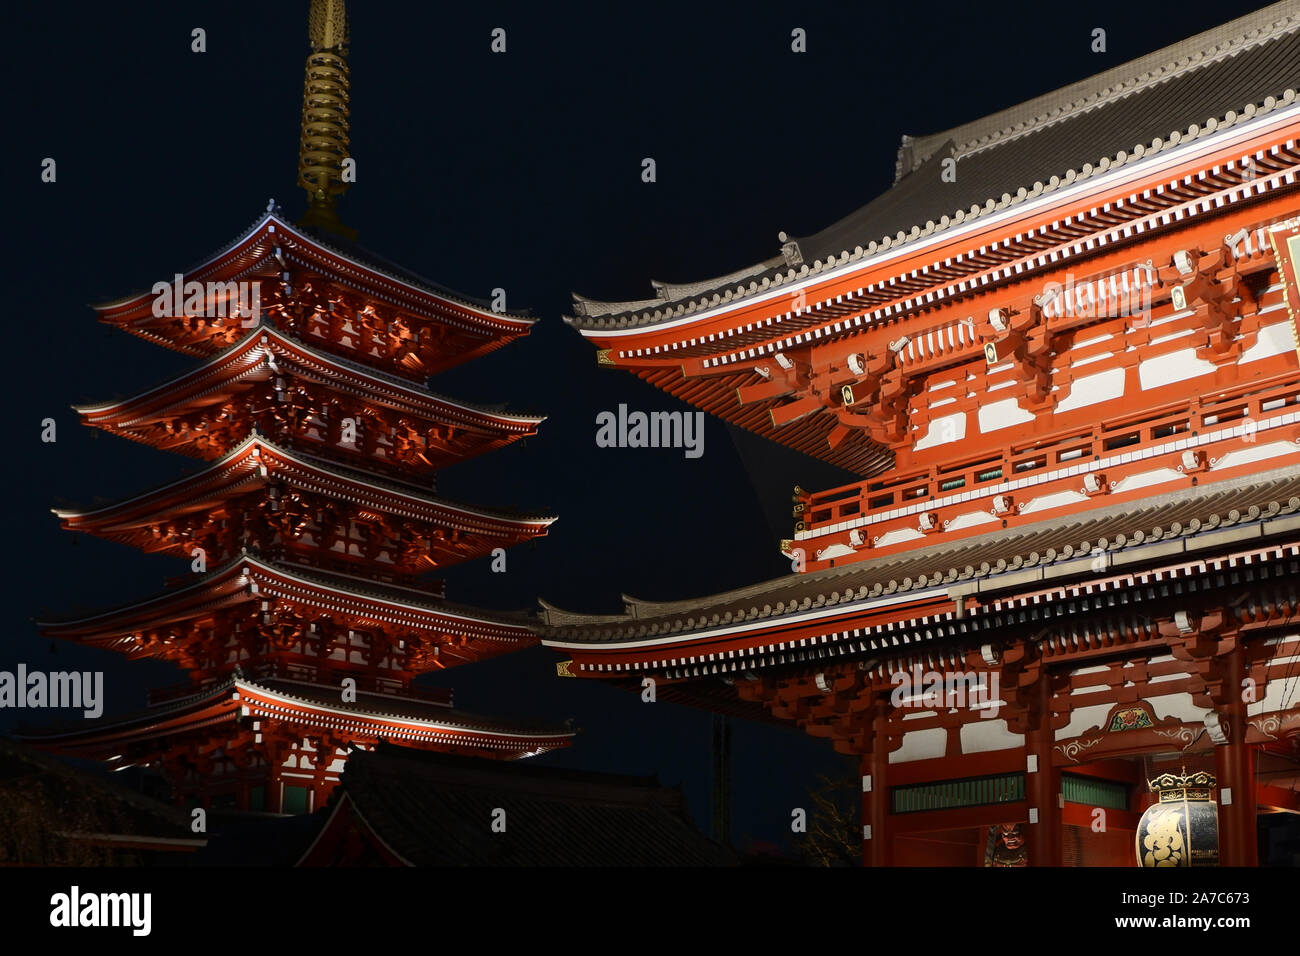 The old historic zen Japanese temple building in Japan city at night Stock Photo